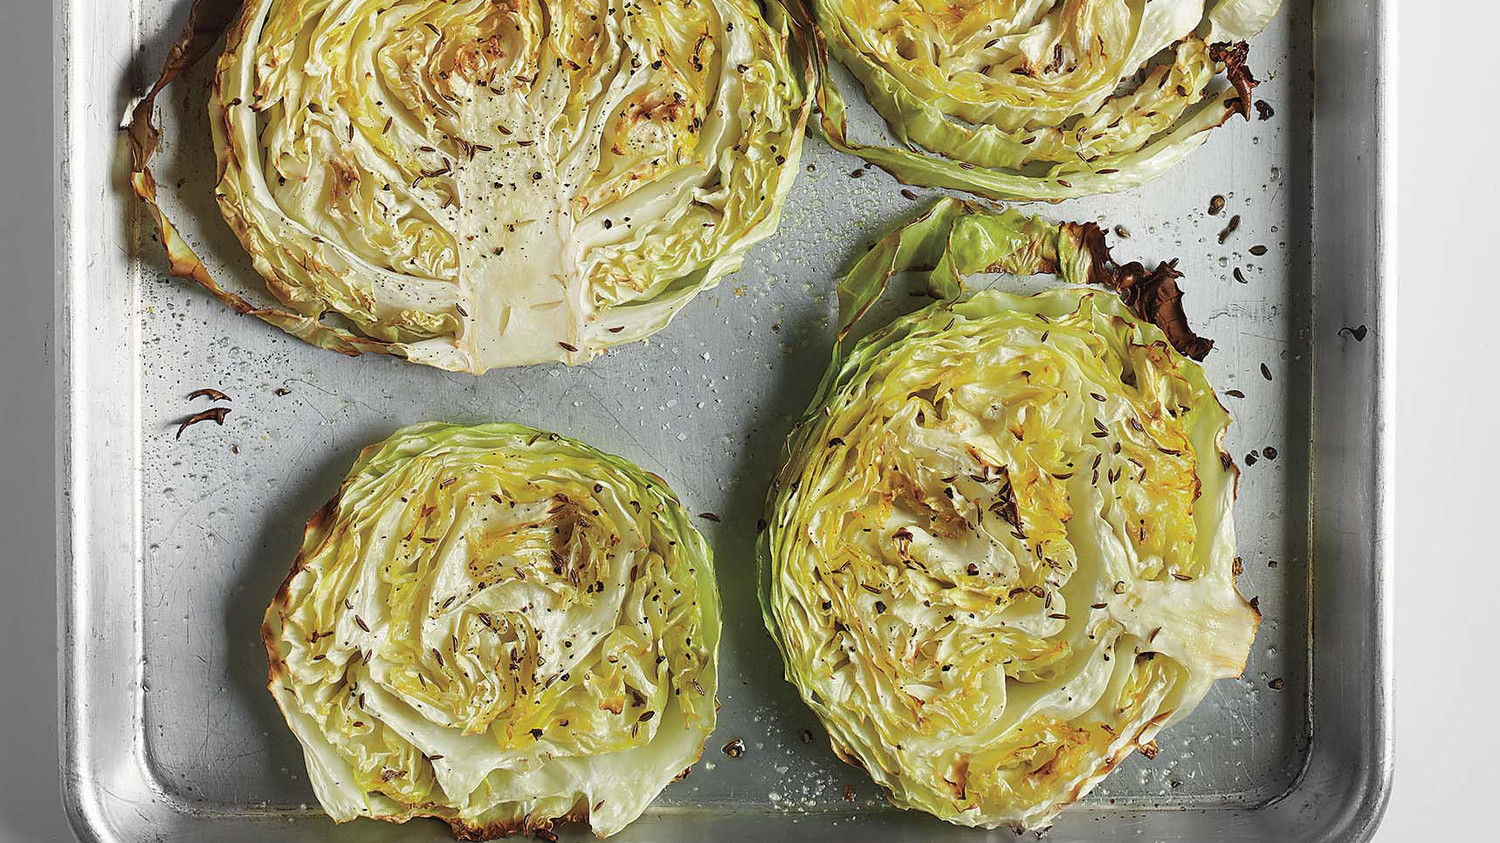 Baked cabbage